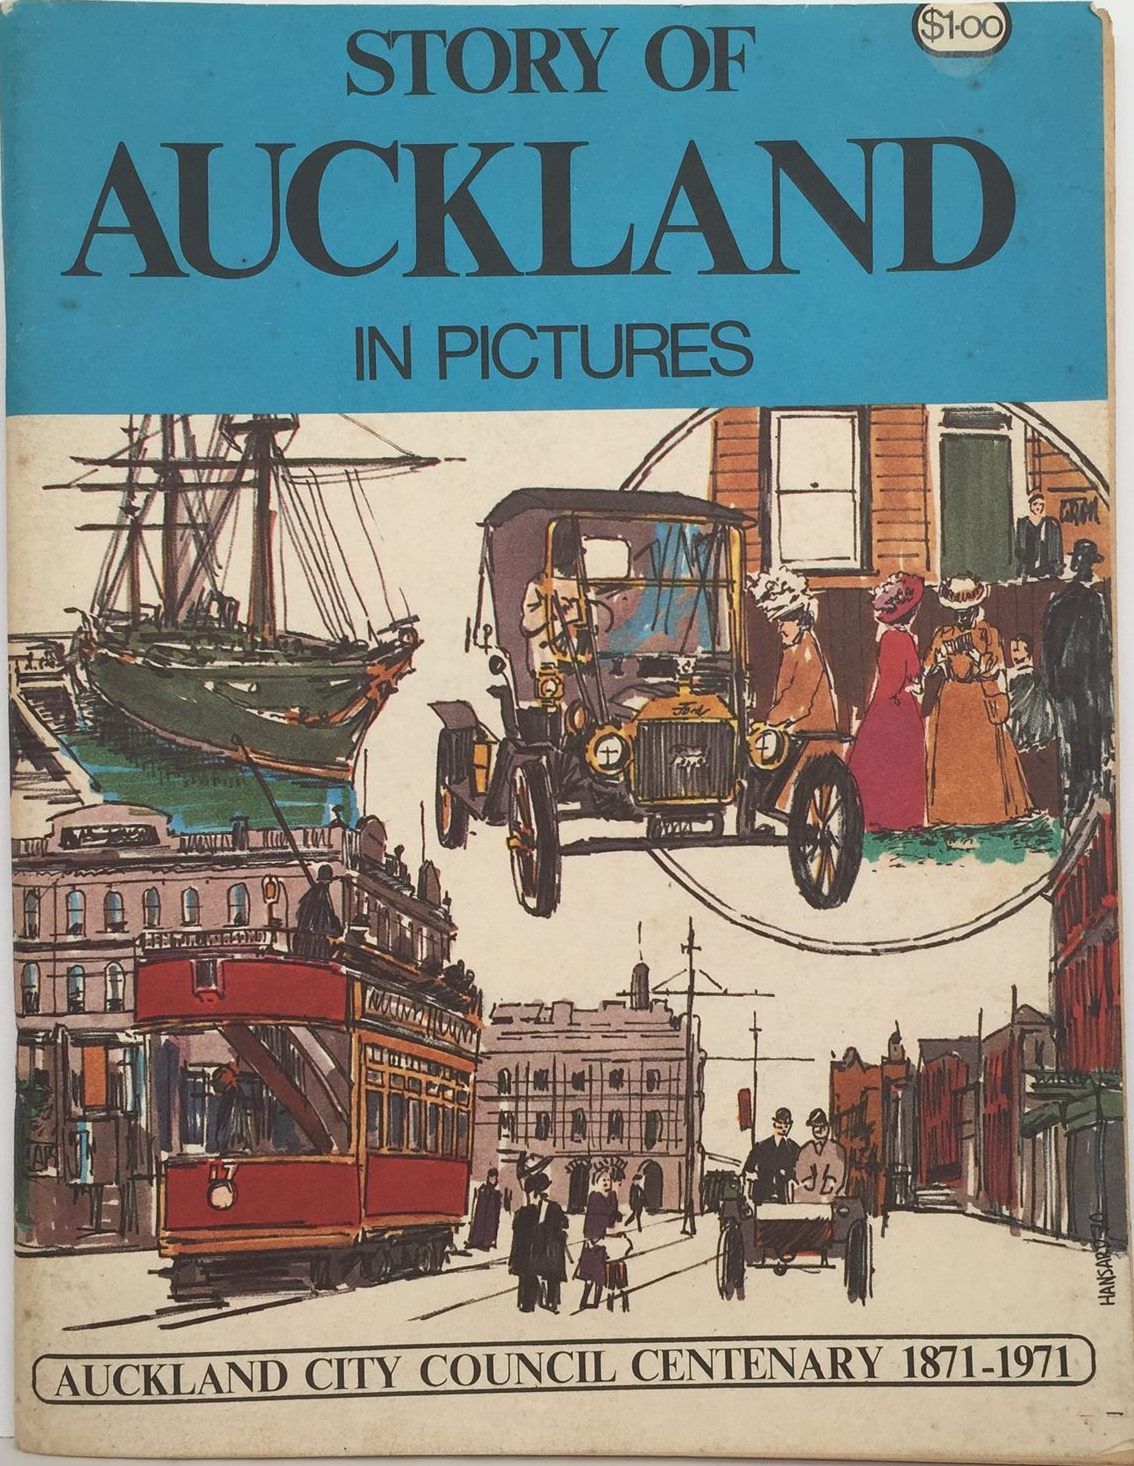 THE STORY OF AUCKLAND in Pictures - Auckland City Council Centenary 1871 - 1971